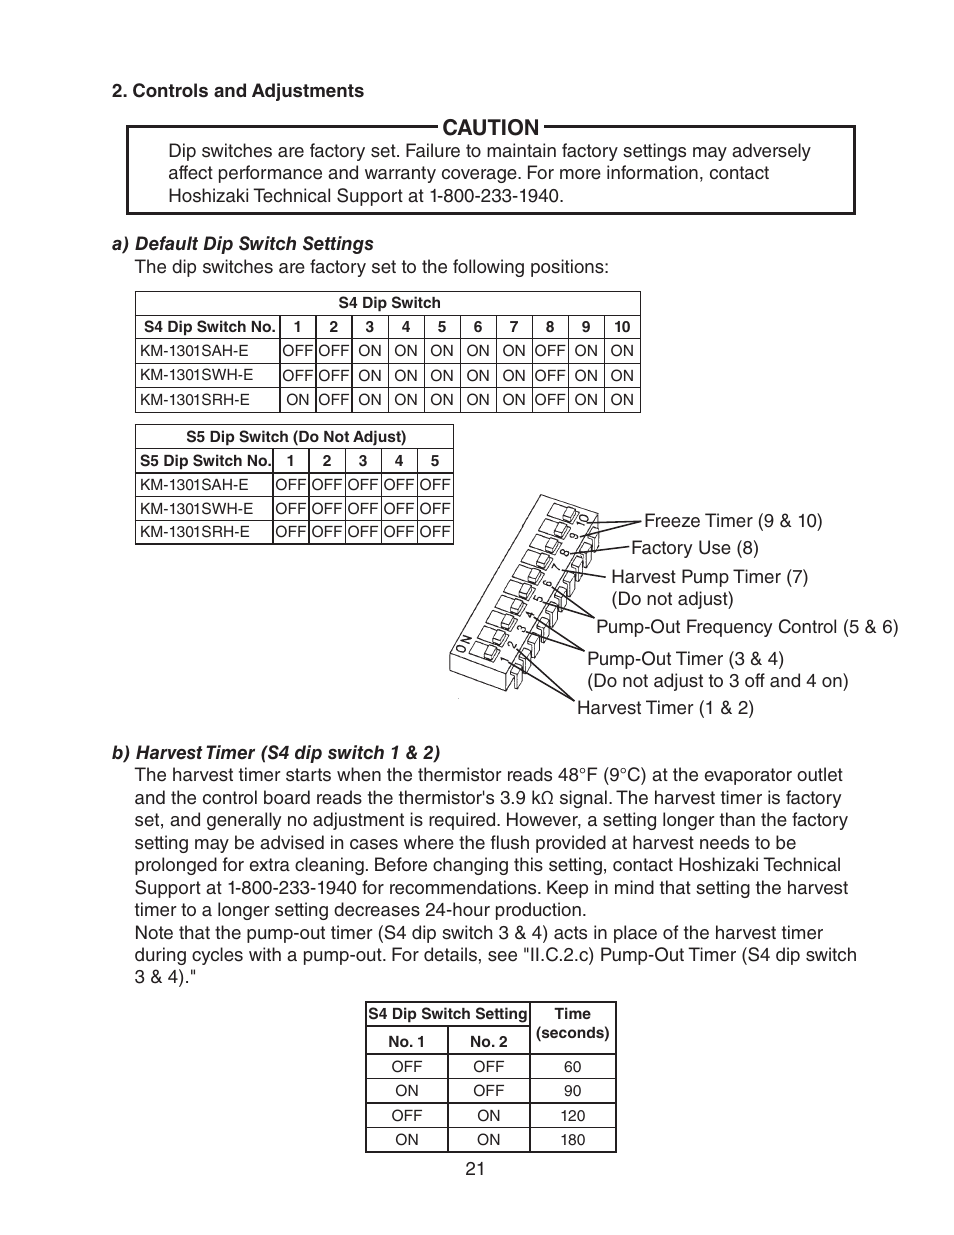 Controls and adjustments, A) default dip switch settings, harvest timer (s4 dip switch 1 & 2) | Hoshizaki STACKABLE CRESCENT CUBER User Manual | Page 21 / 59